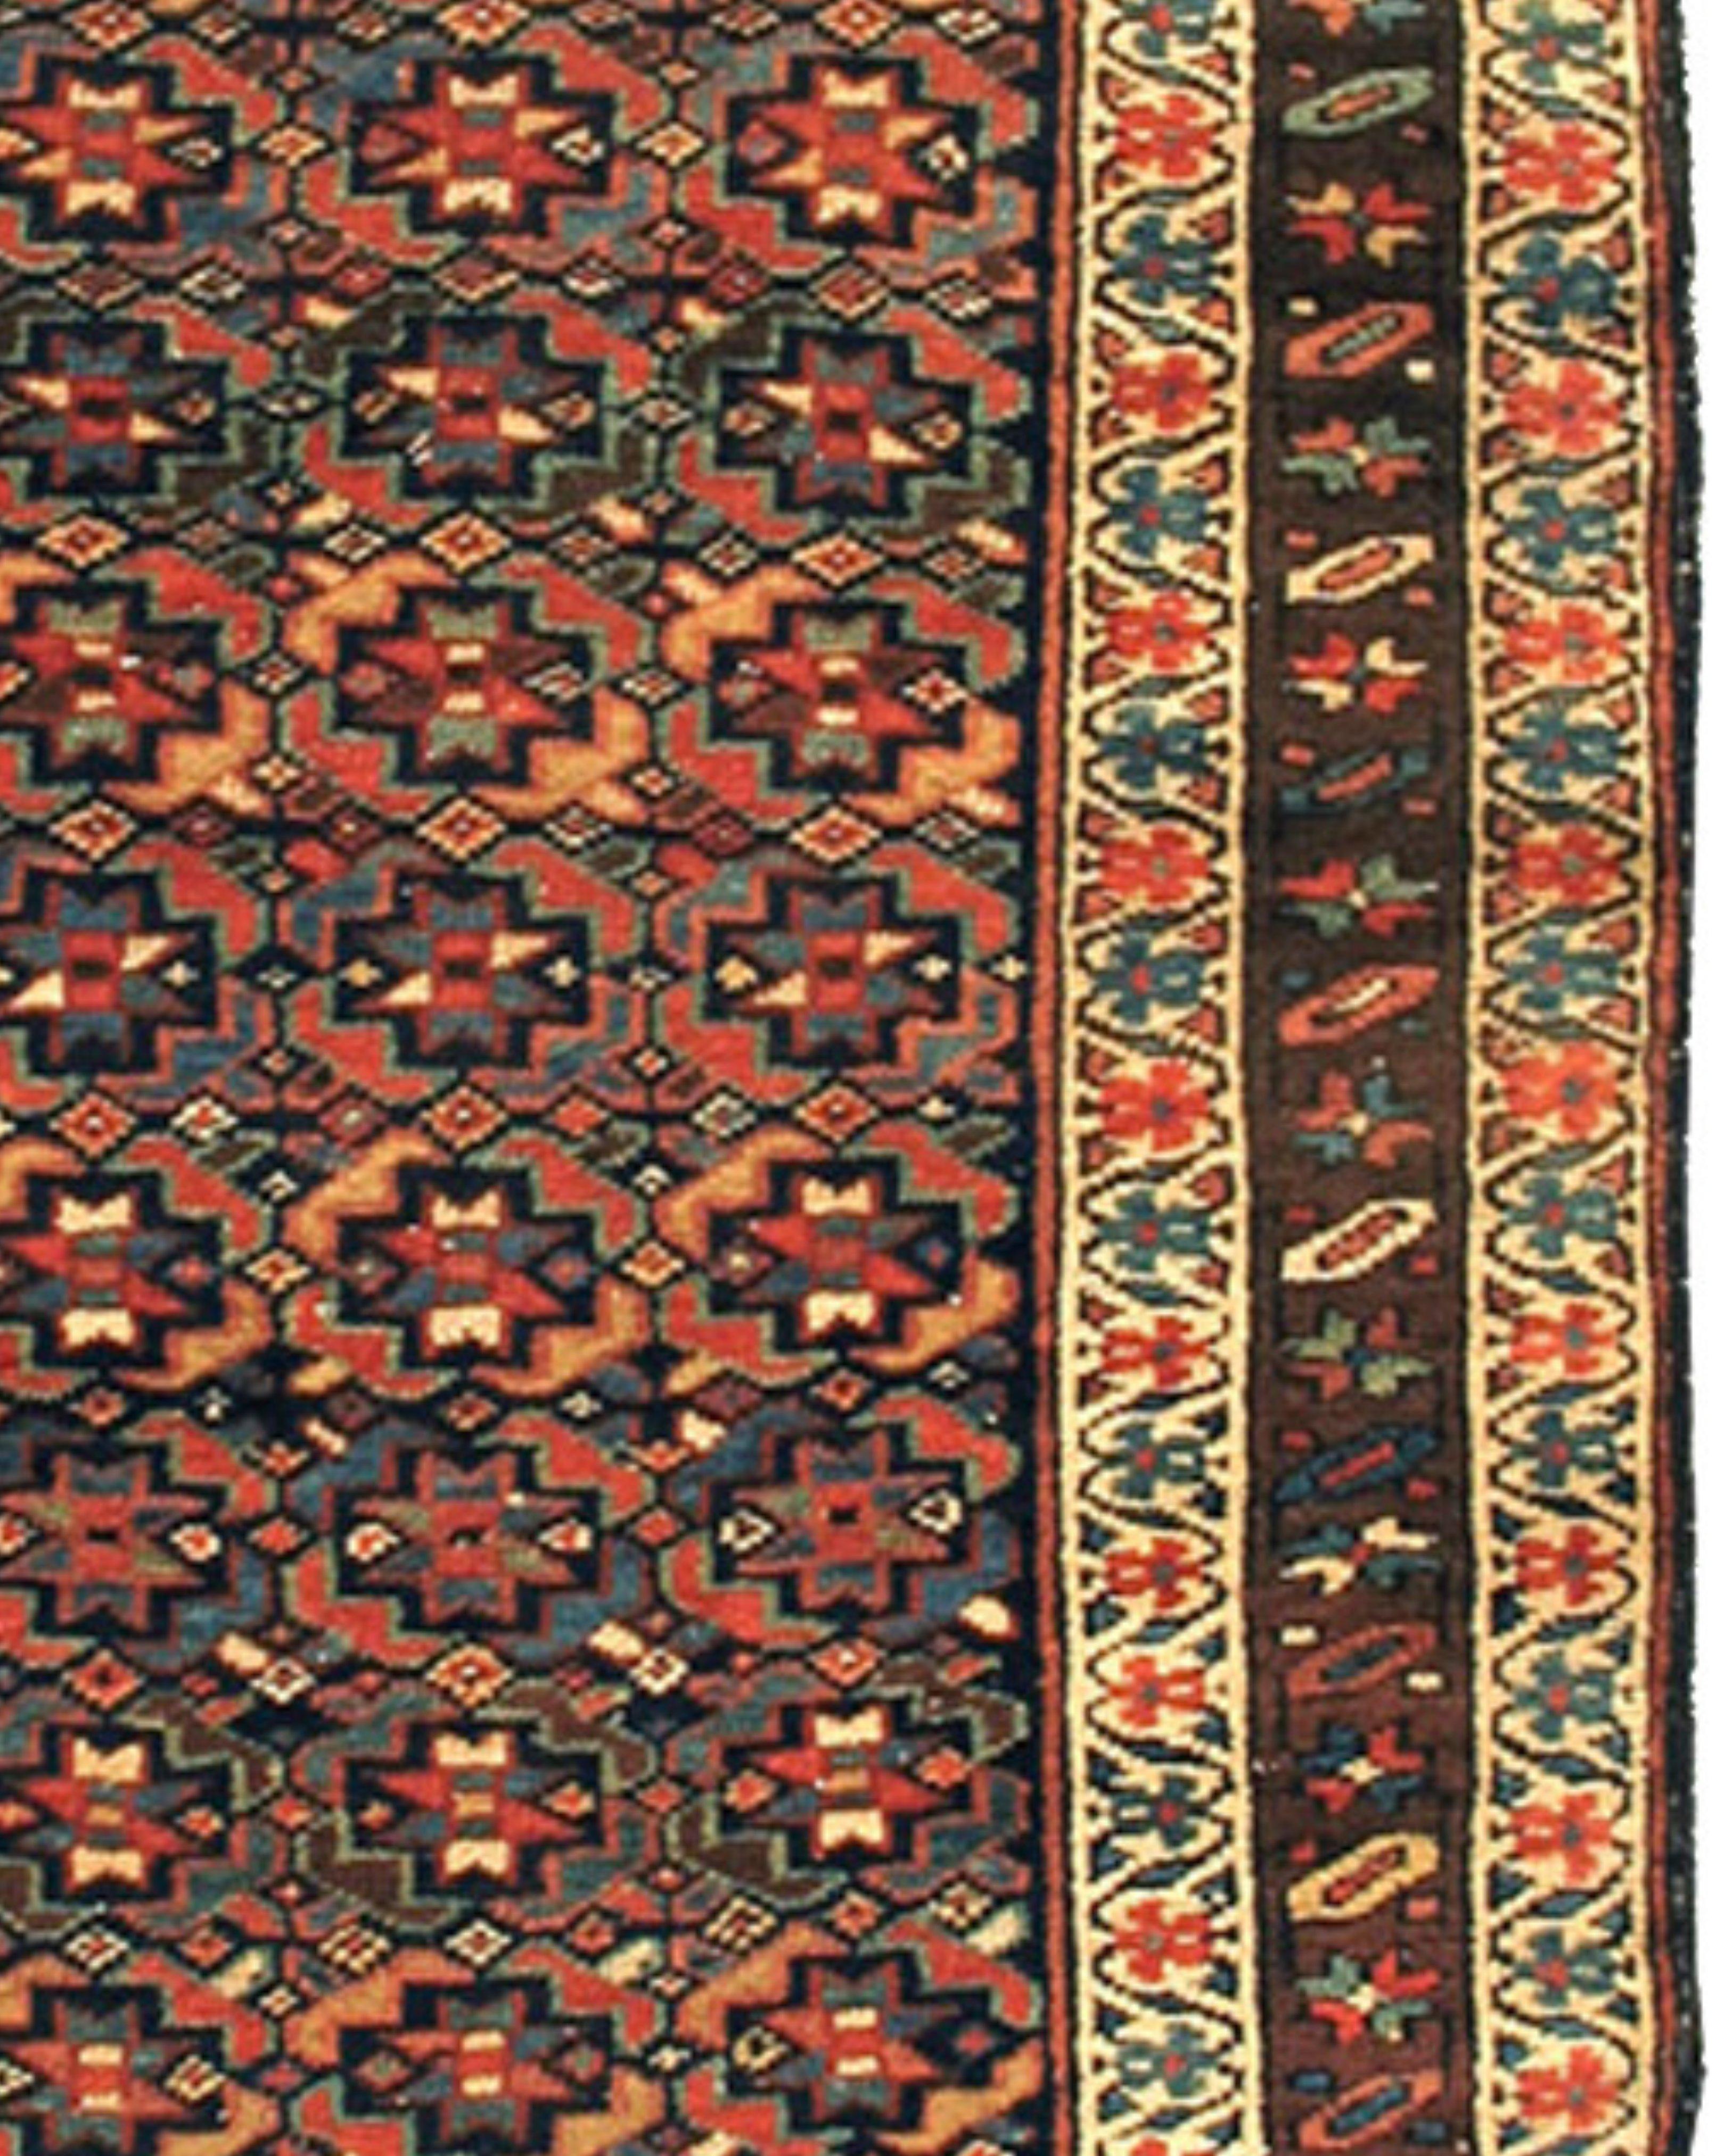 Antique Northwest Persian Runner Rug, 19th Century

Additional Information:
Dimensions: 3'3